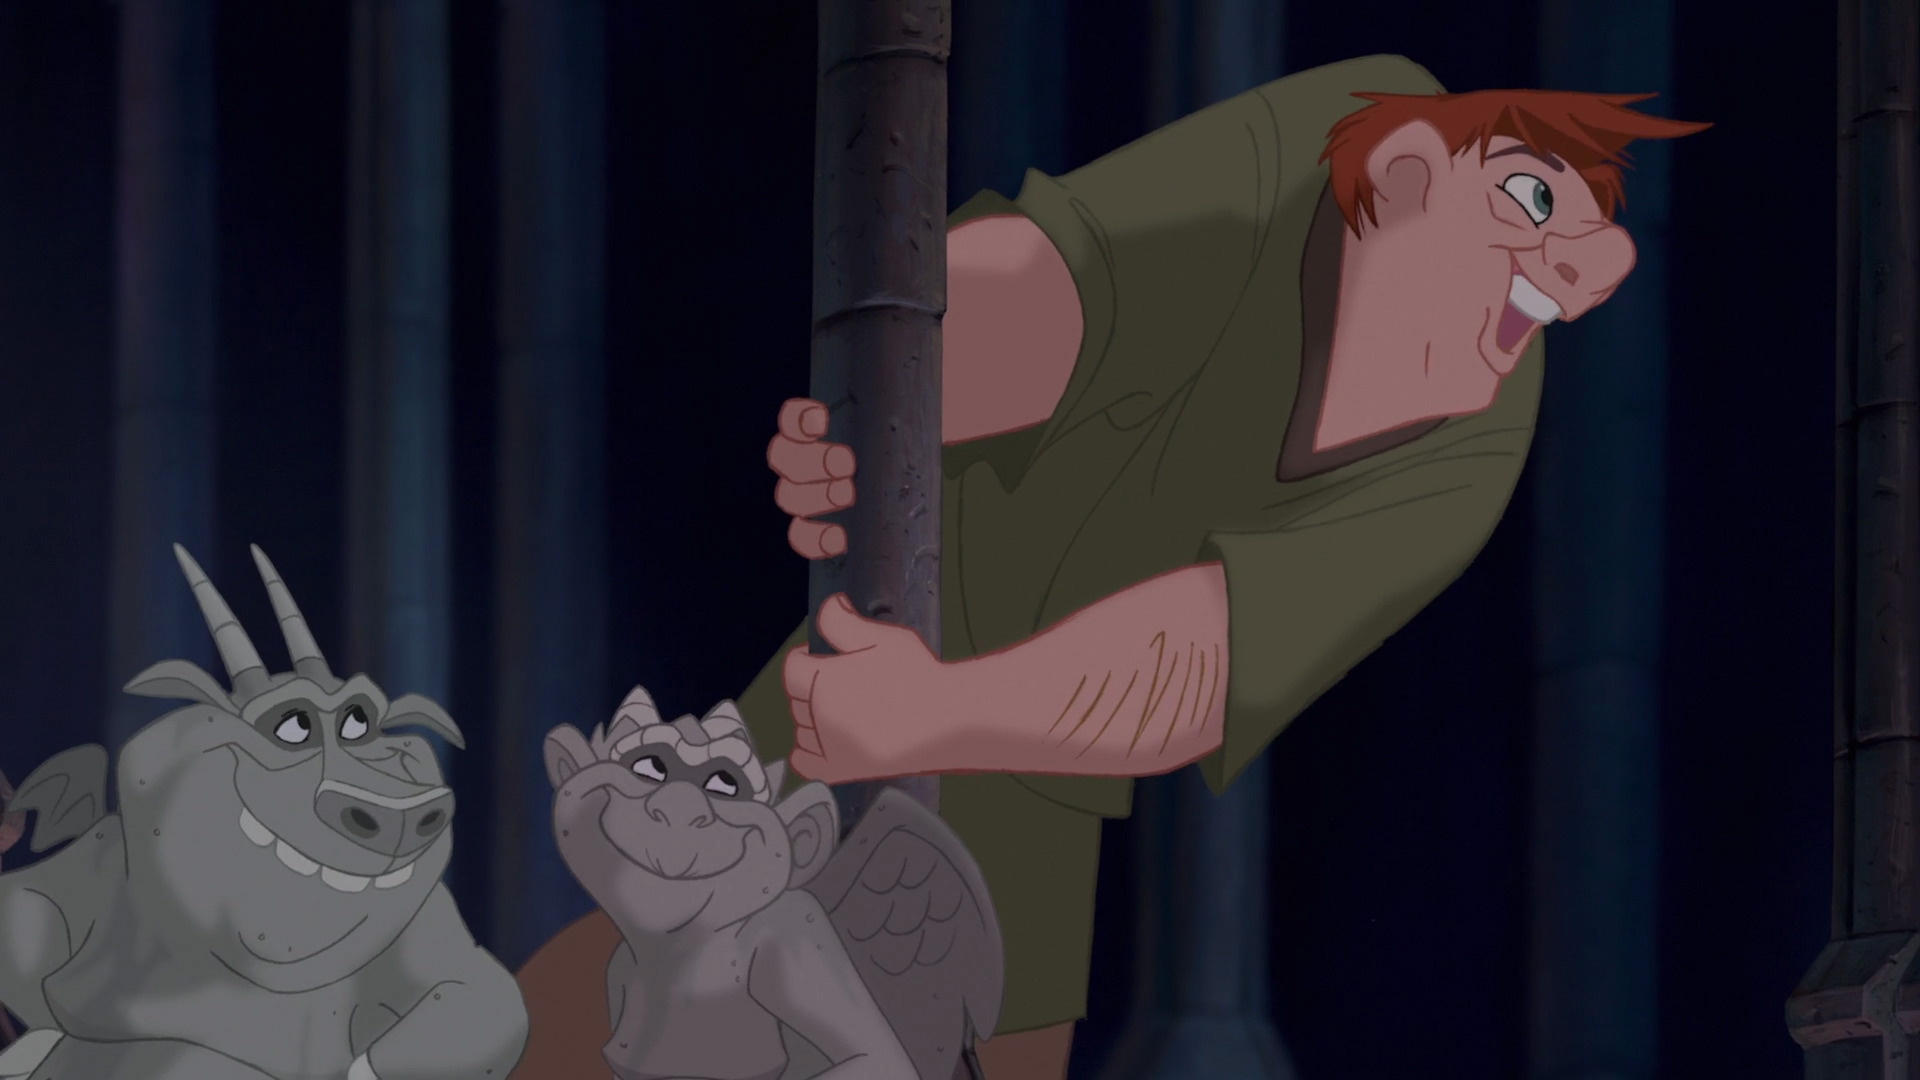 The Hunchback of Notre Dame, Movie review, Cool kats, Reviews, 1920x1080 Full HD Desktop